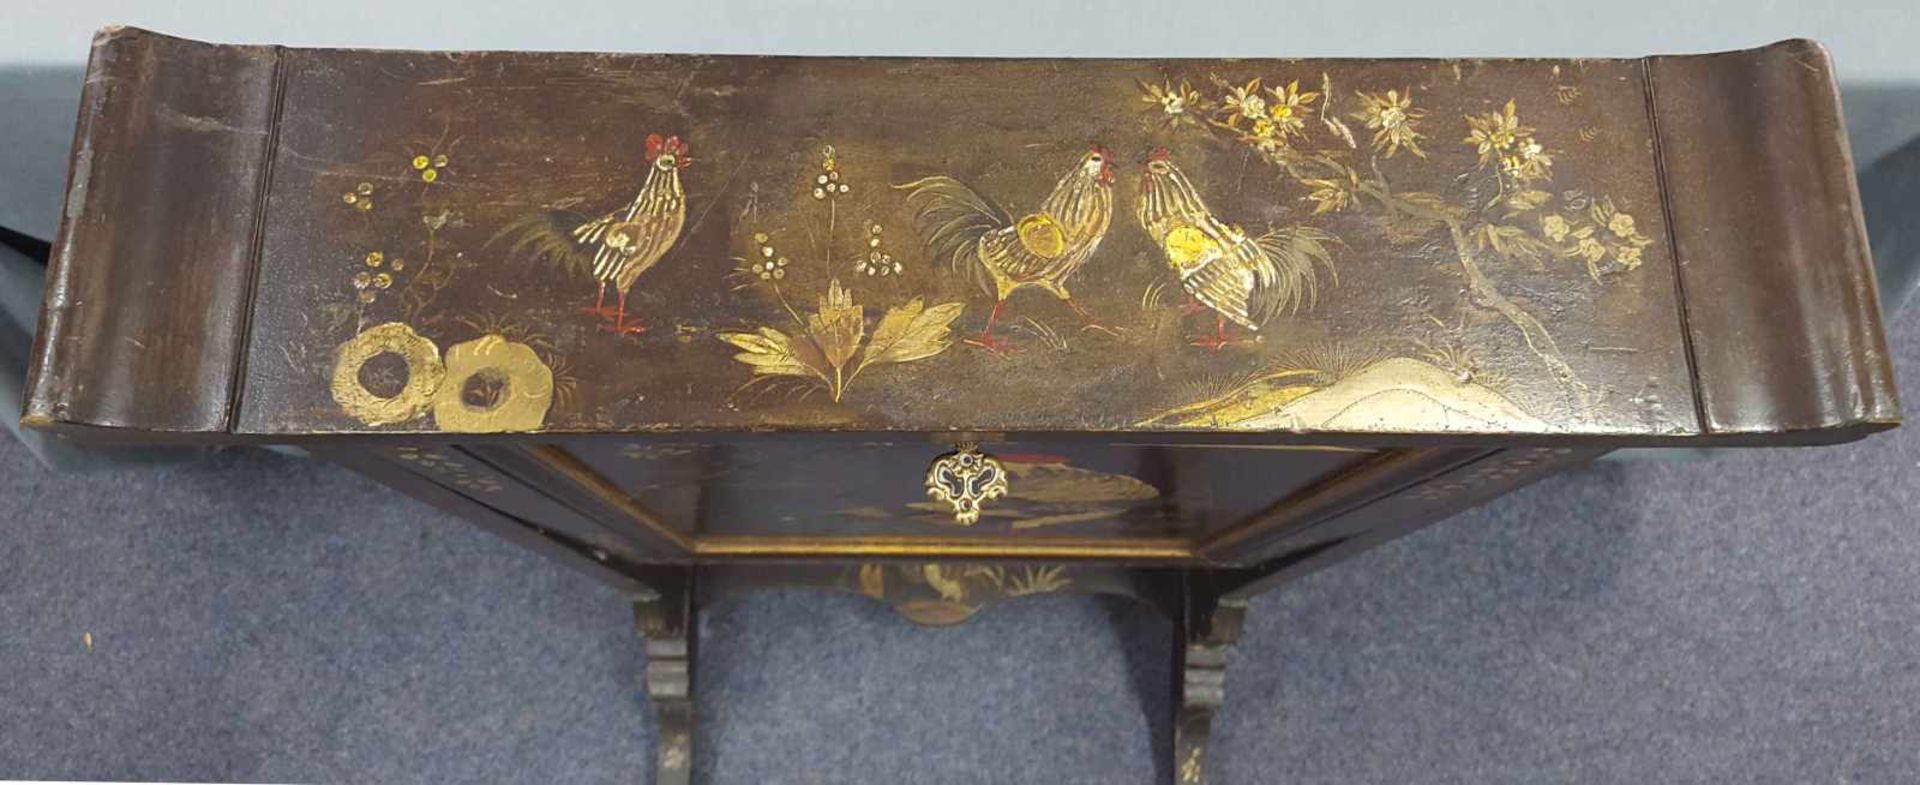 Secretary. Acquired in China before 1940. Lacquer painting. - Bild 9 aus 9